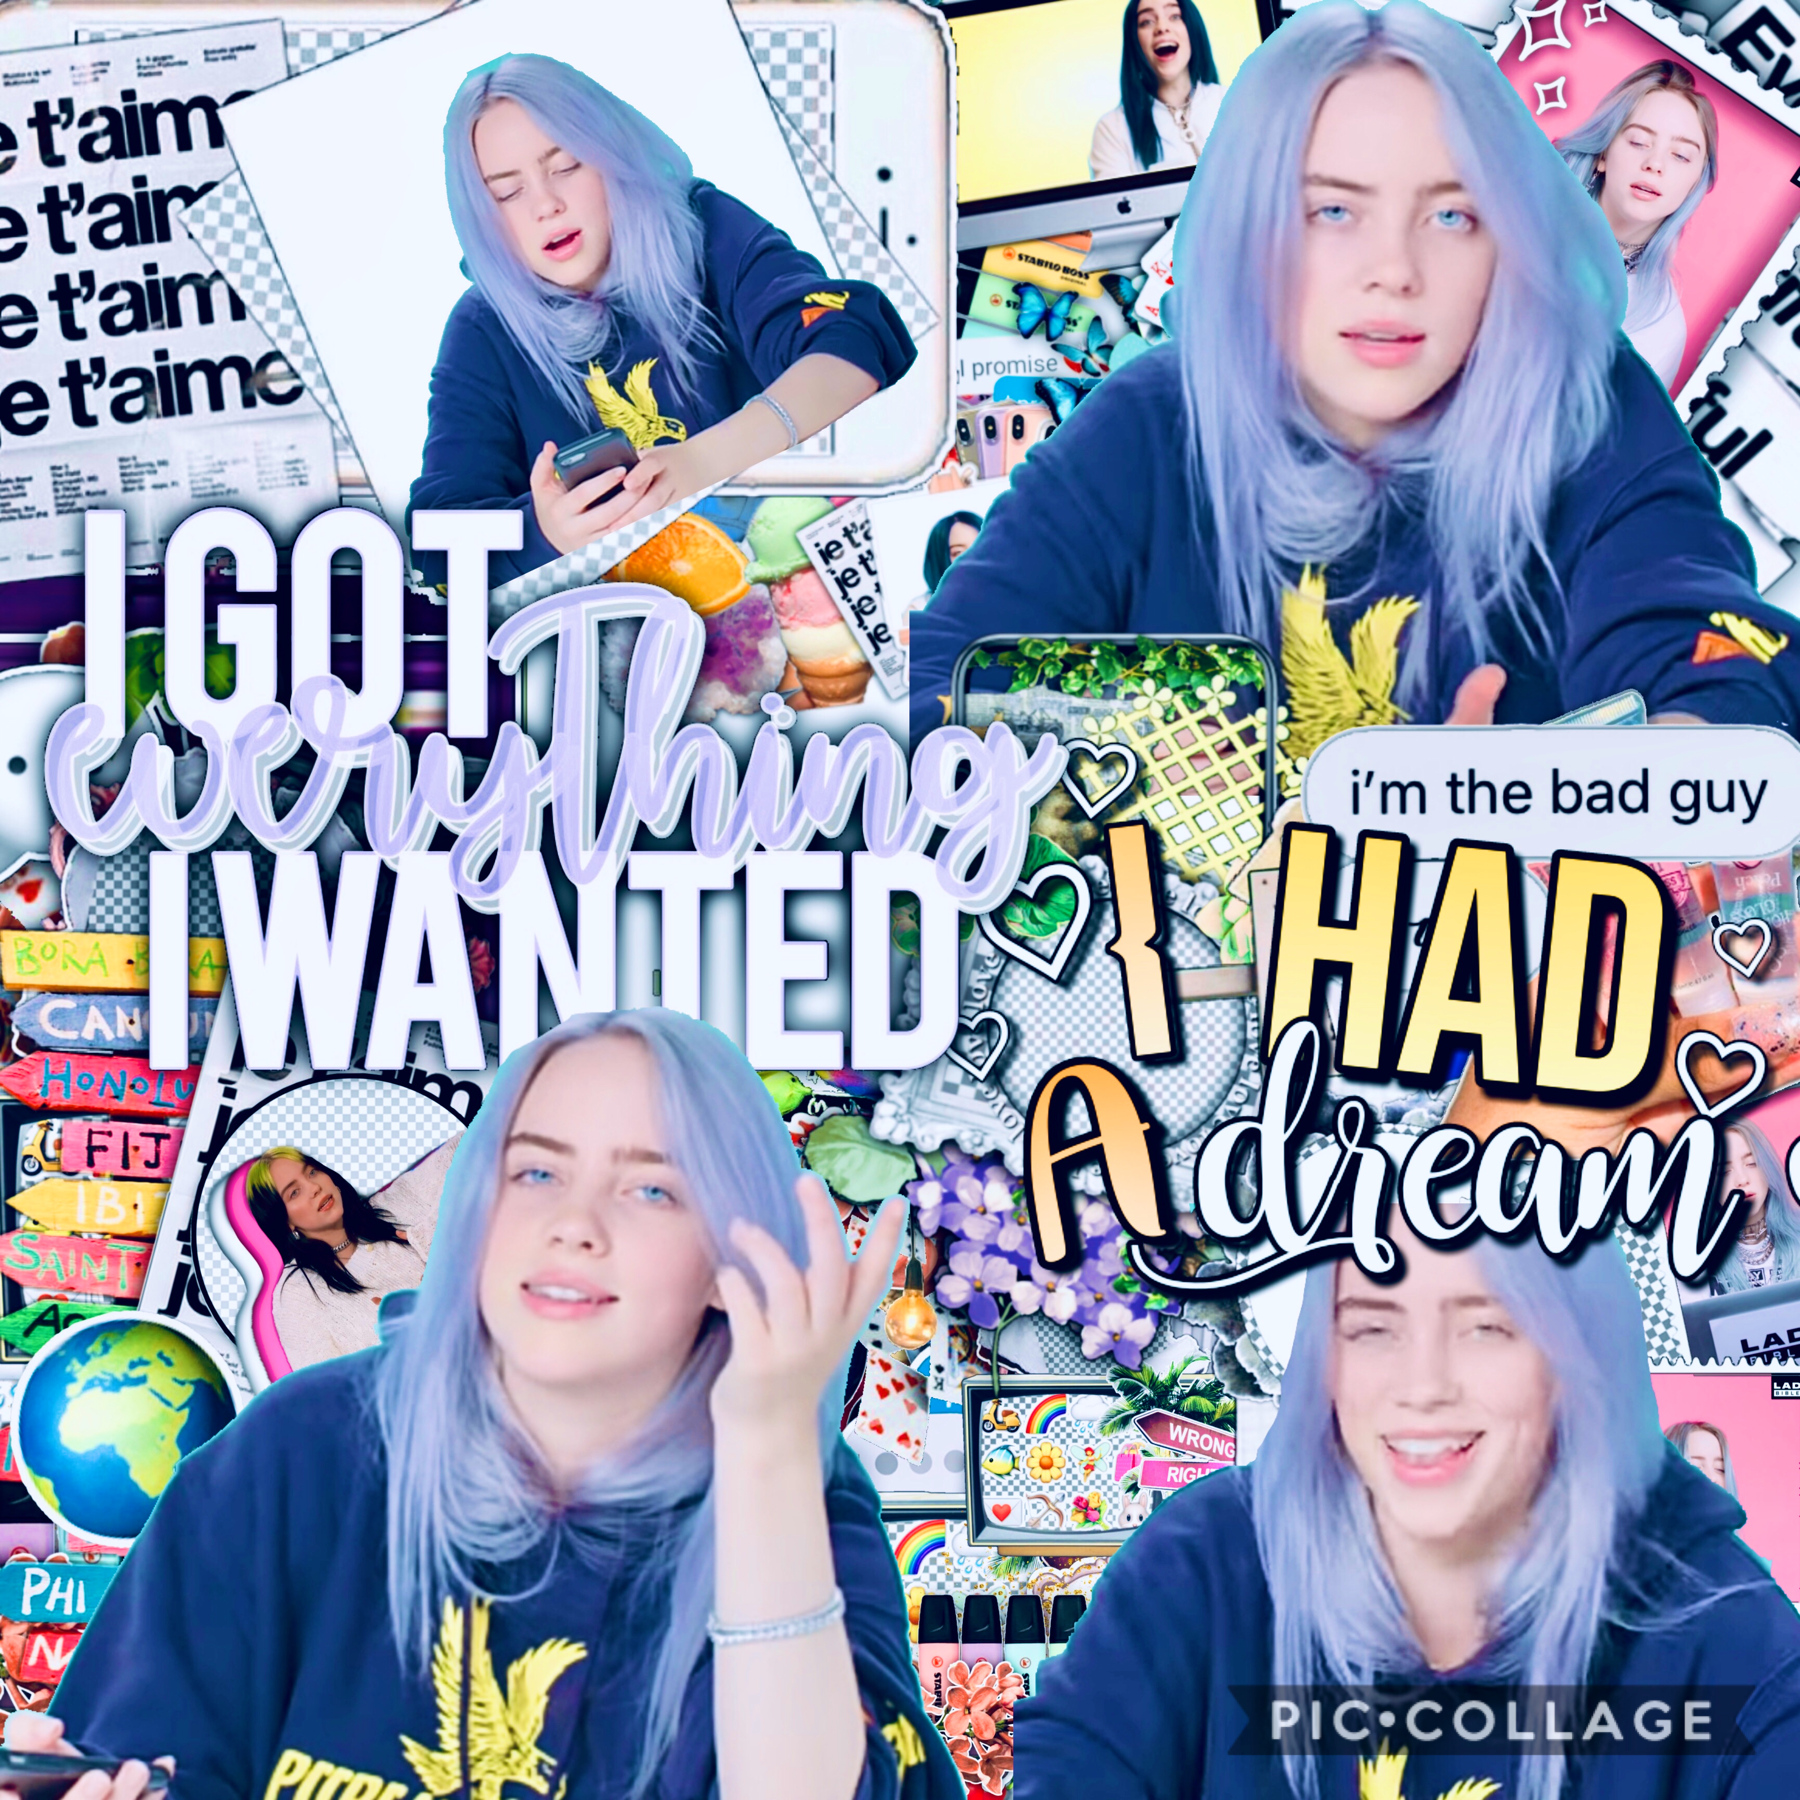 💗🌻 TAP 🌻💗
Ahhh guys I’m super proud of this 🤩🤩 Check the remixes like I can’t believe the progress from my last Billie edit I’m proud of myself guys 🥺🥺